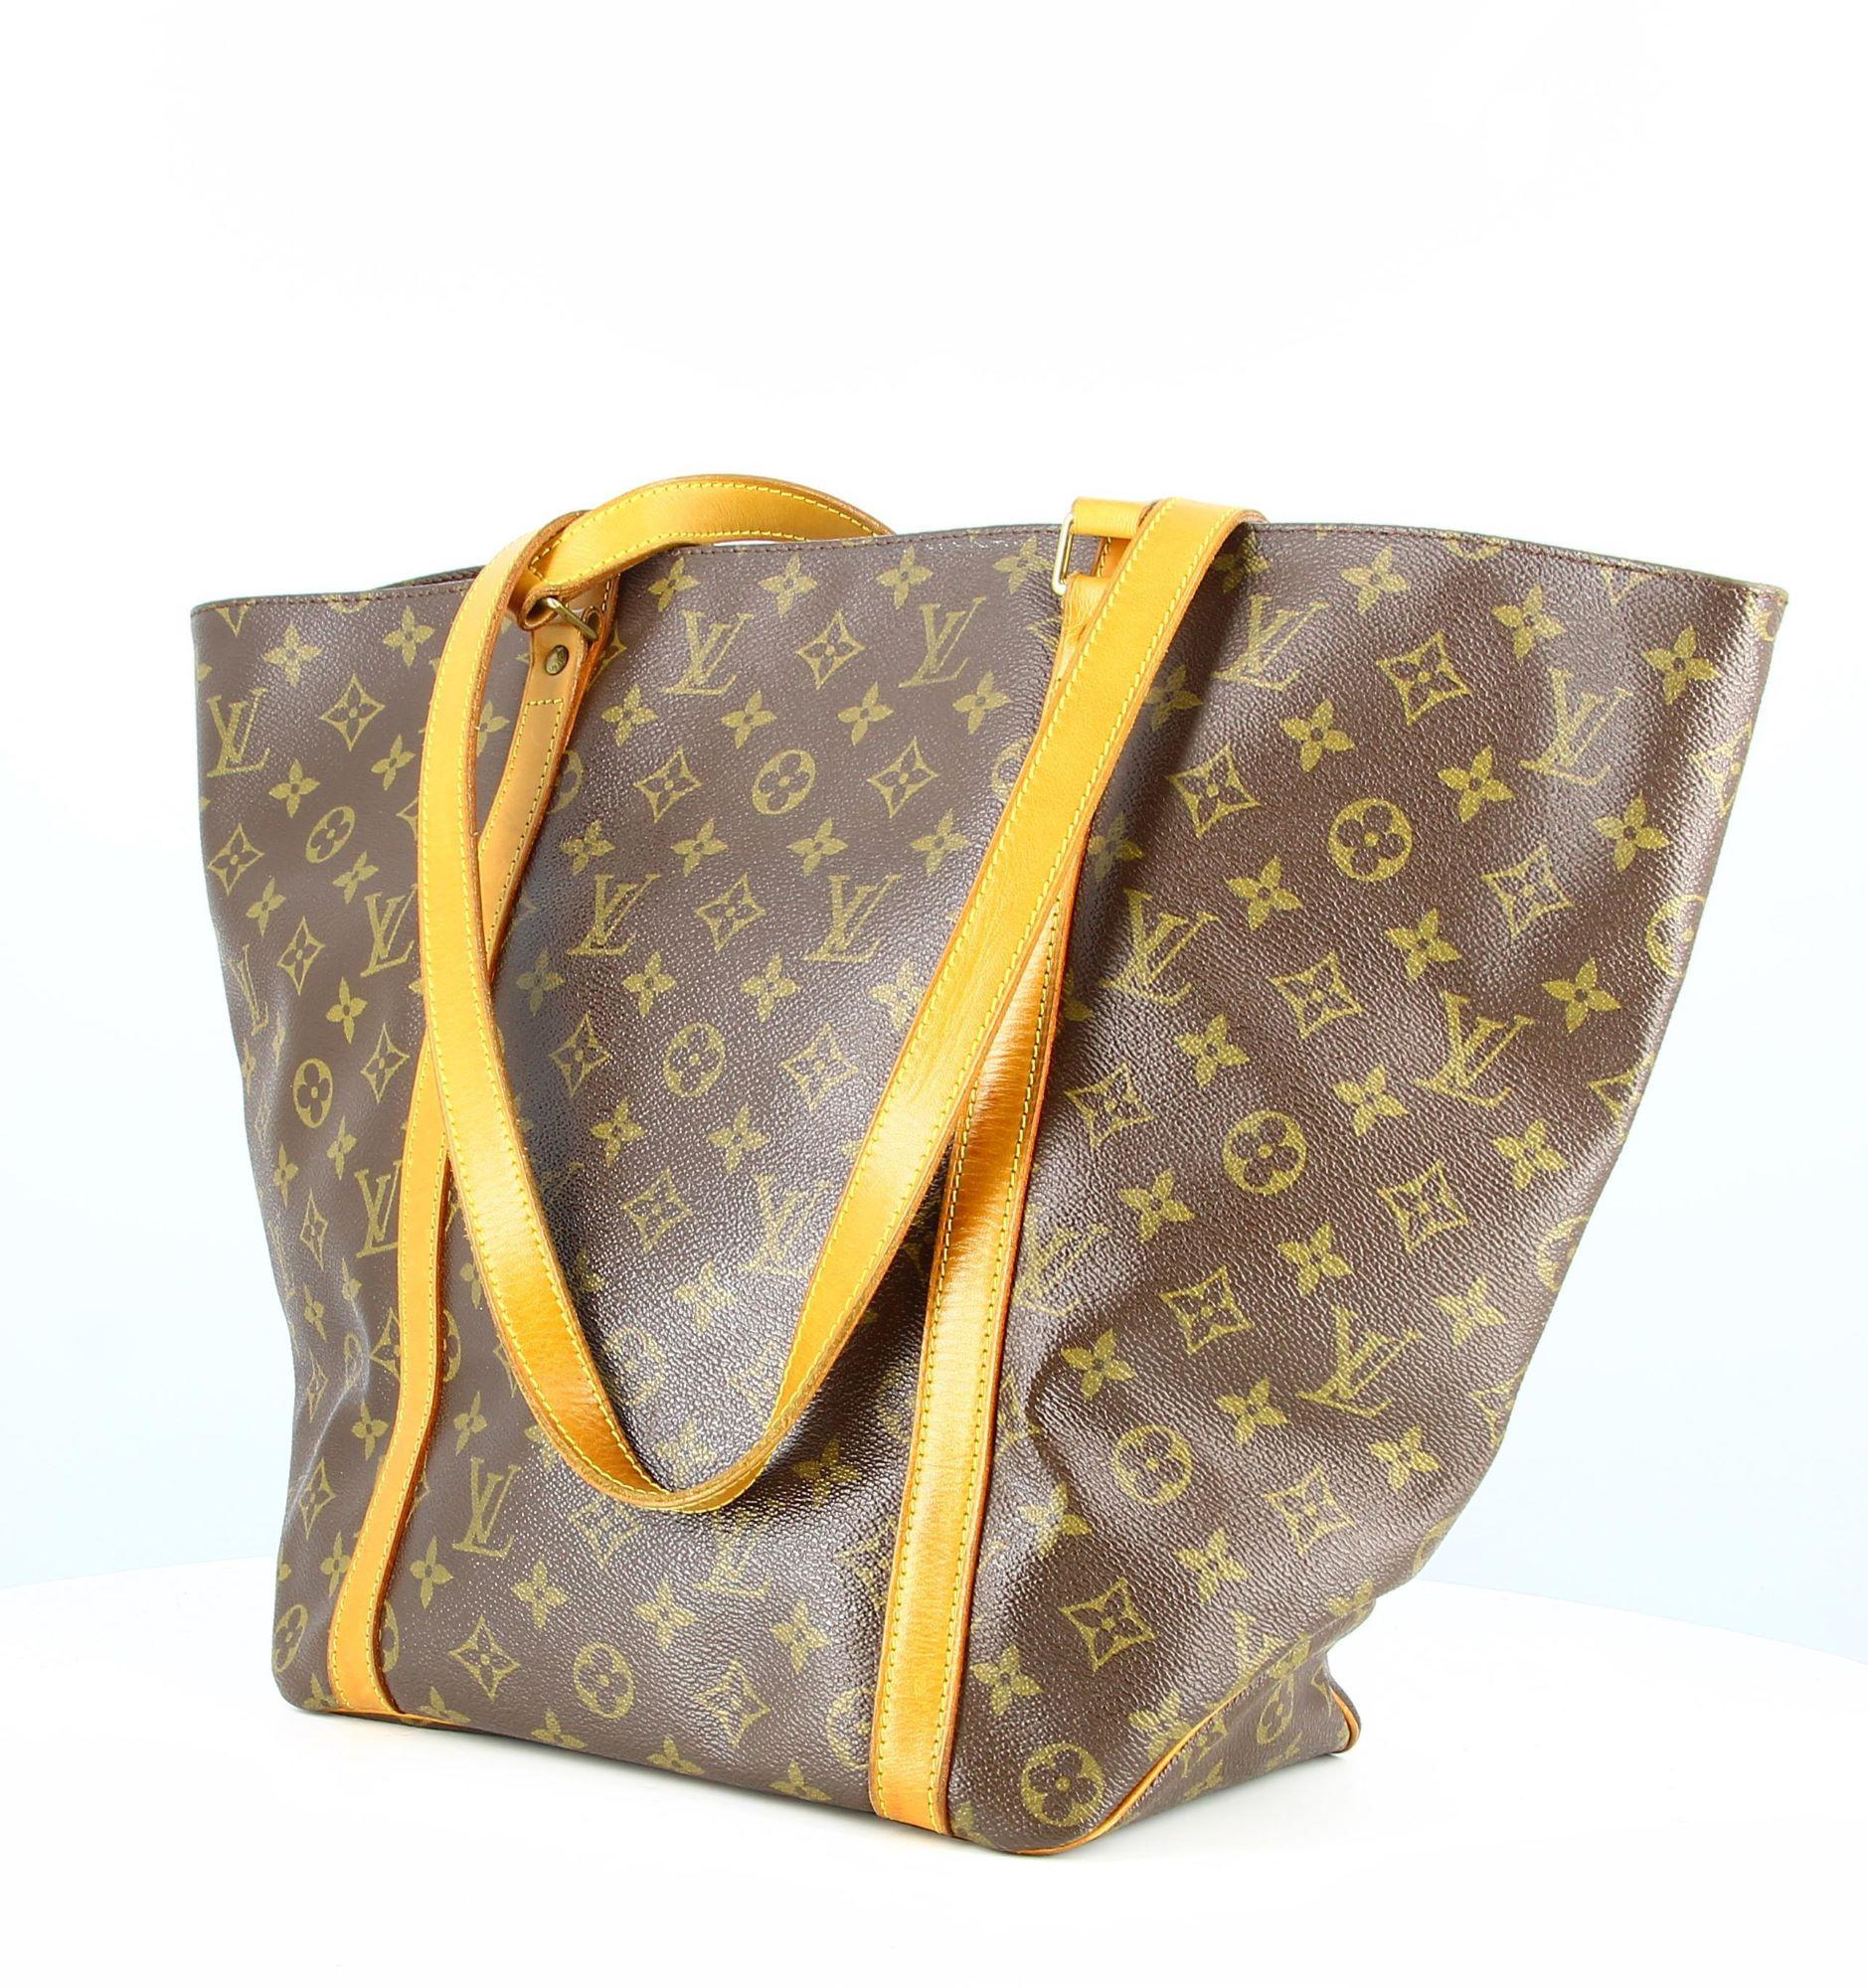 1996 Louis Vuitton Shopping Bag
- Good condition with slight traces of wear appeared with time.
- Brown monogram bag, long straps, shoulder strap, brown leather
- Brown leather interior, small pocket inside zipped golden.